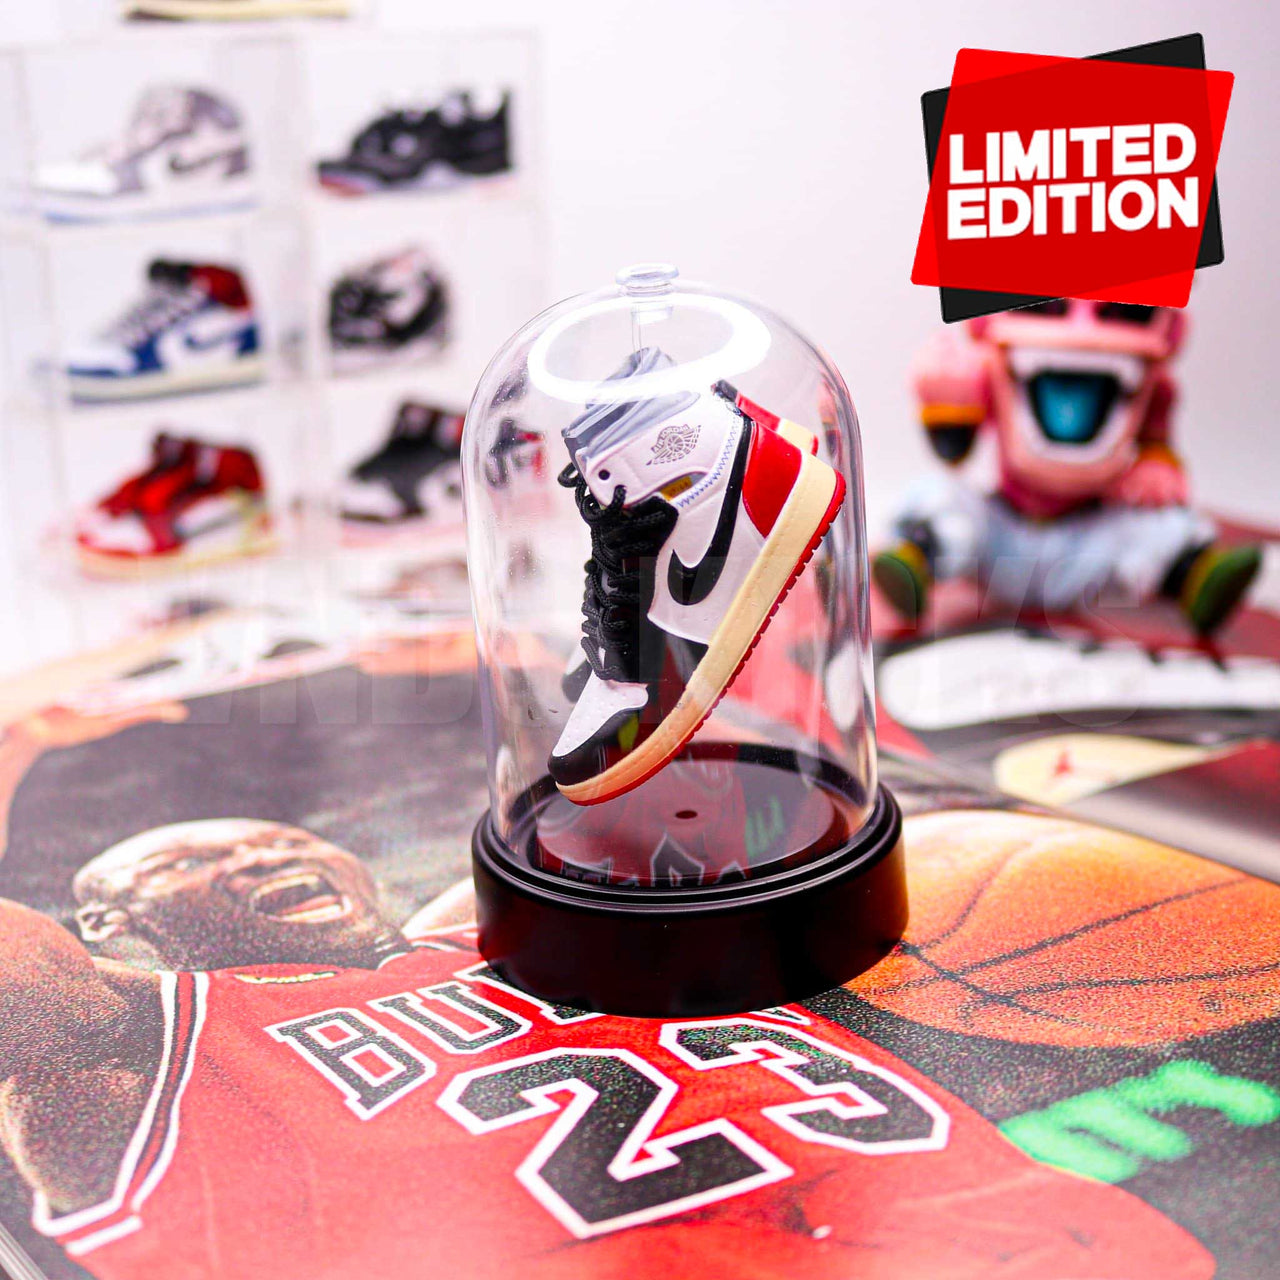 Mini Sneaker Capsule With Display Set (Sneakers not included)